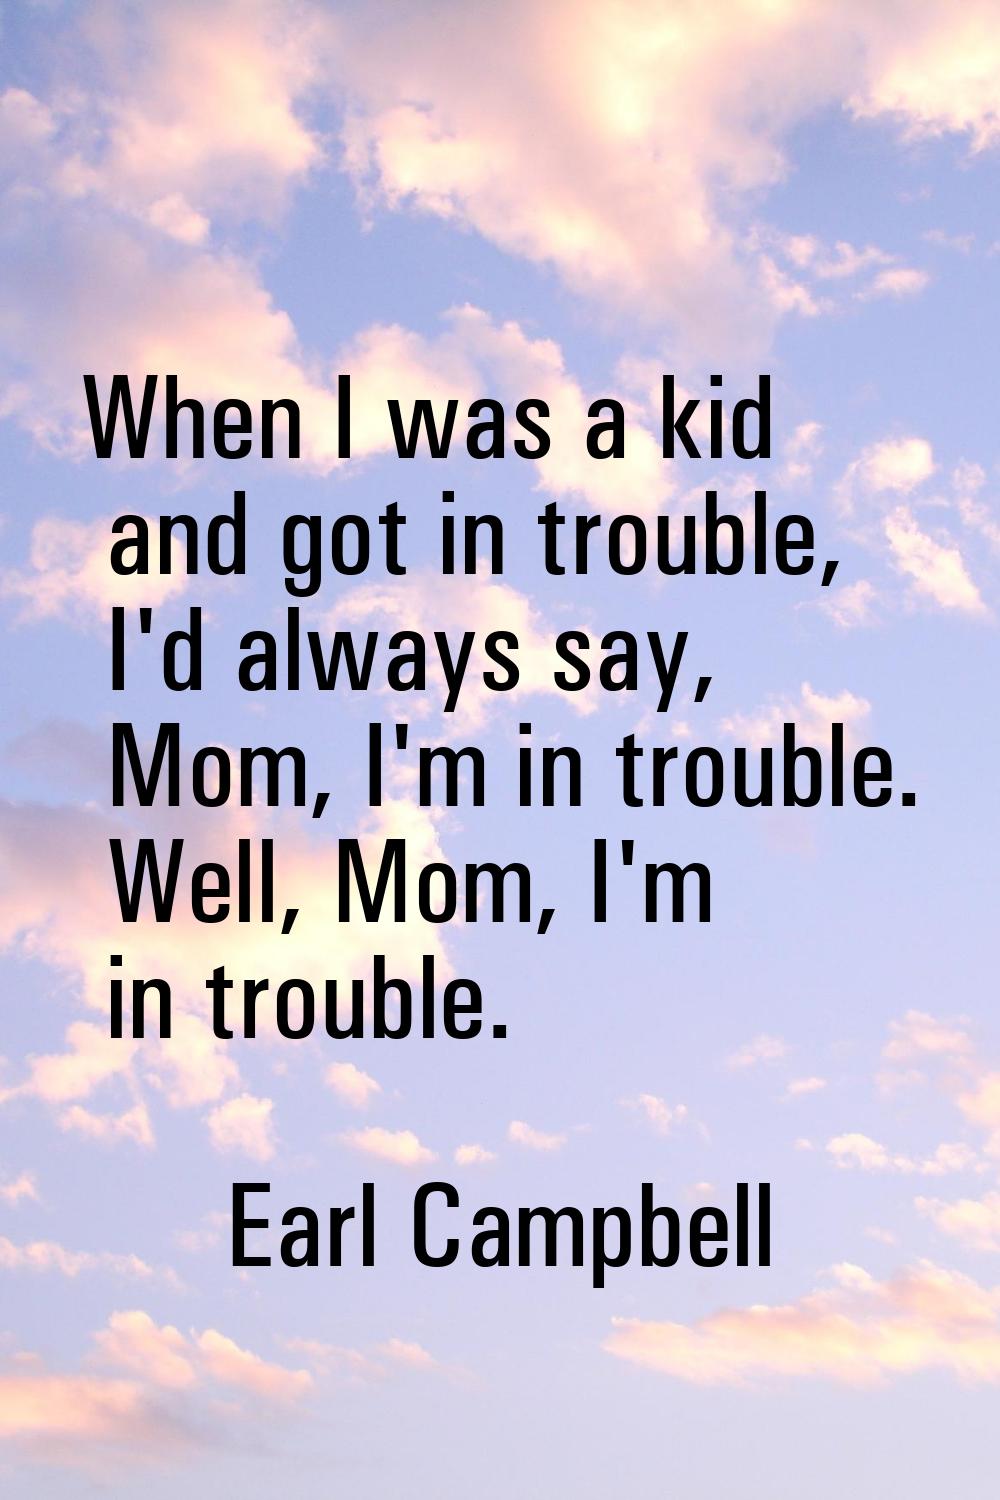 When I was a kid and got in trouble, I'd always say, Mom, I'm in trouble. Well, Mom, I'm in trouble